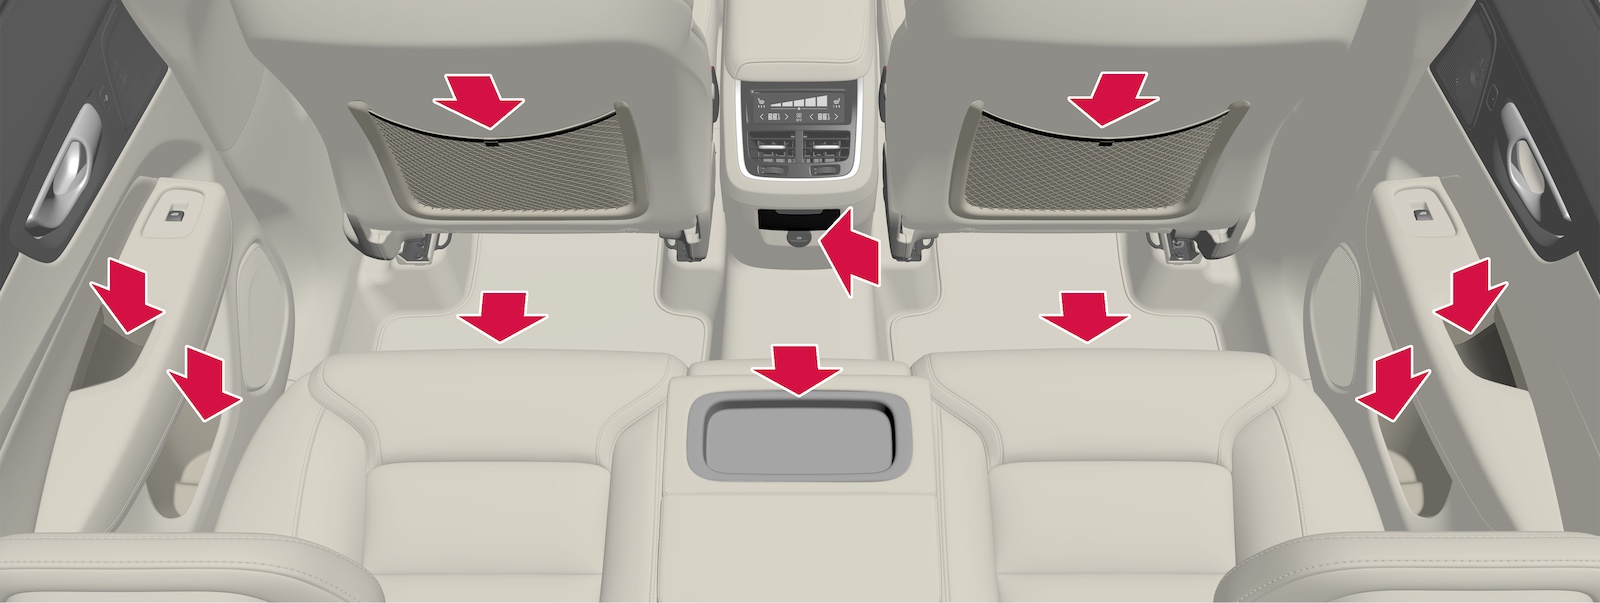 P5-2017-XC60-Overview interior rear seat